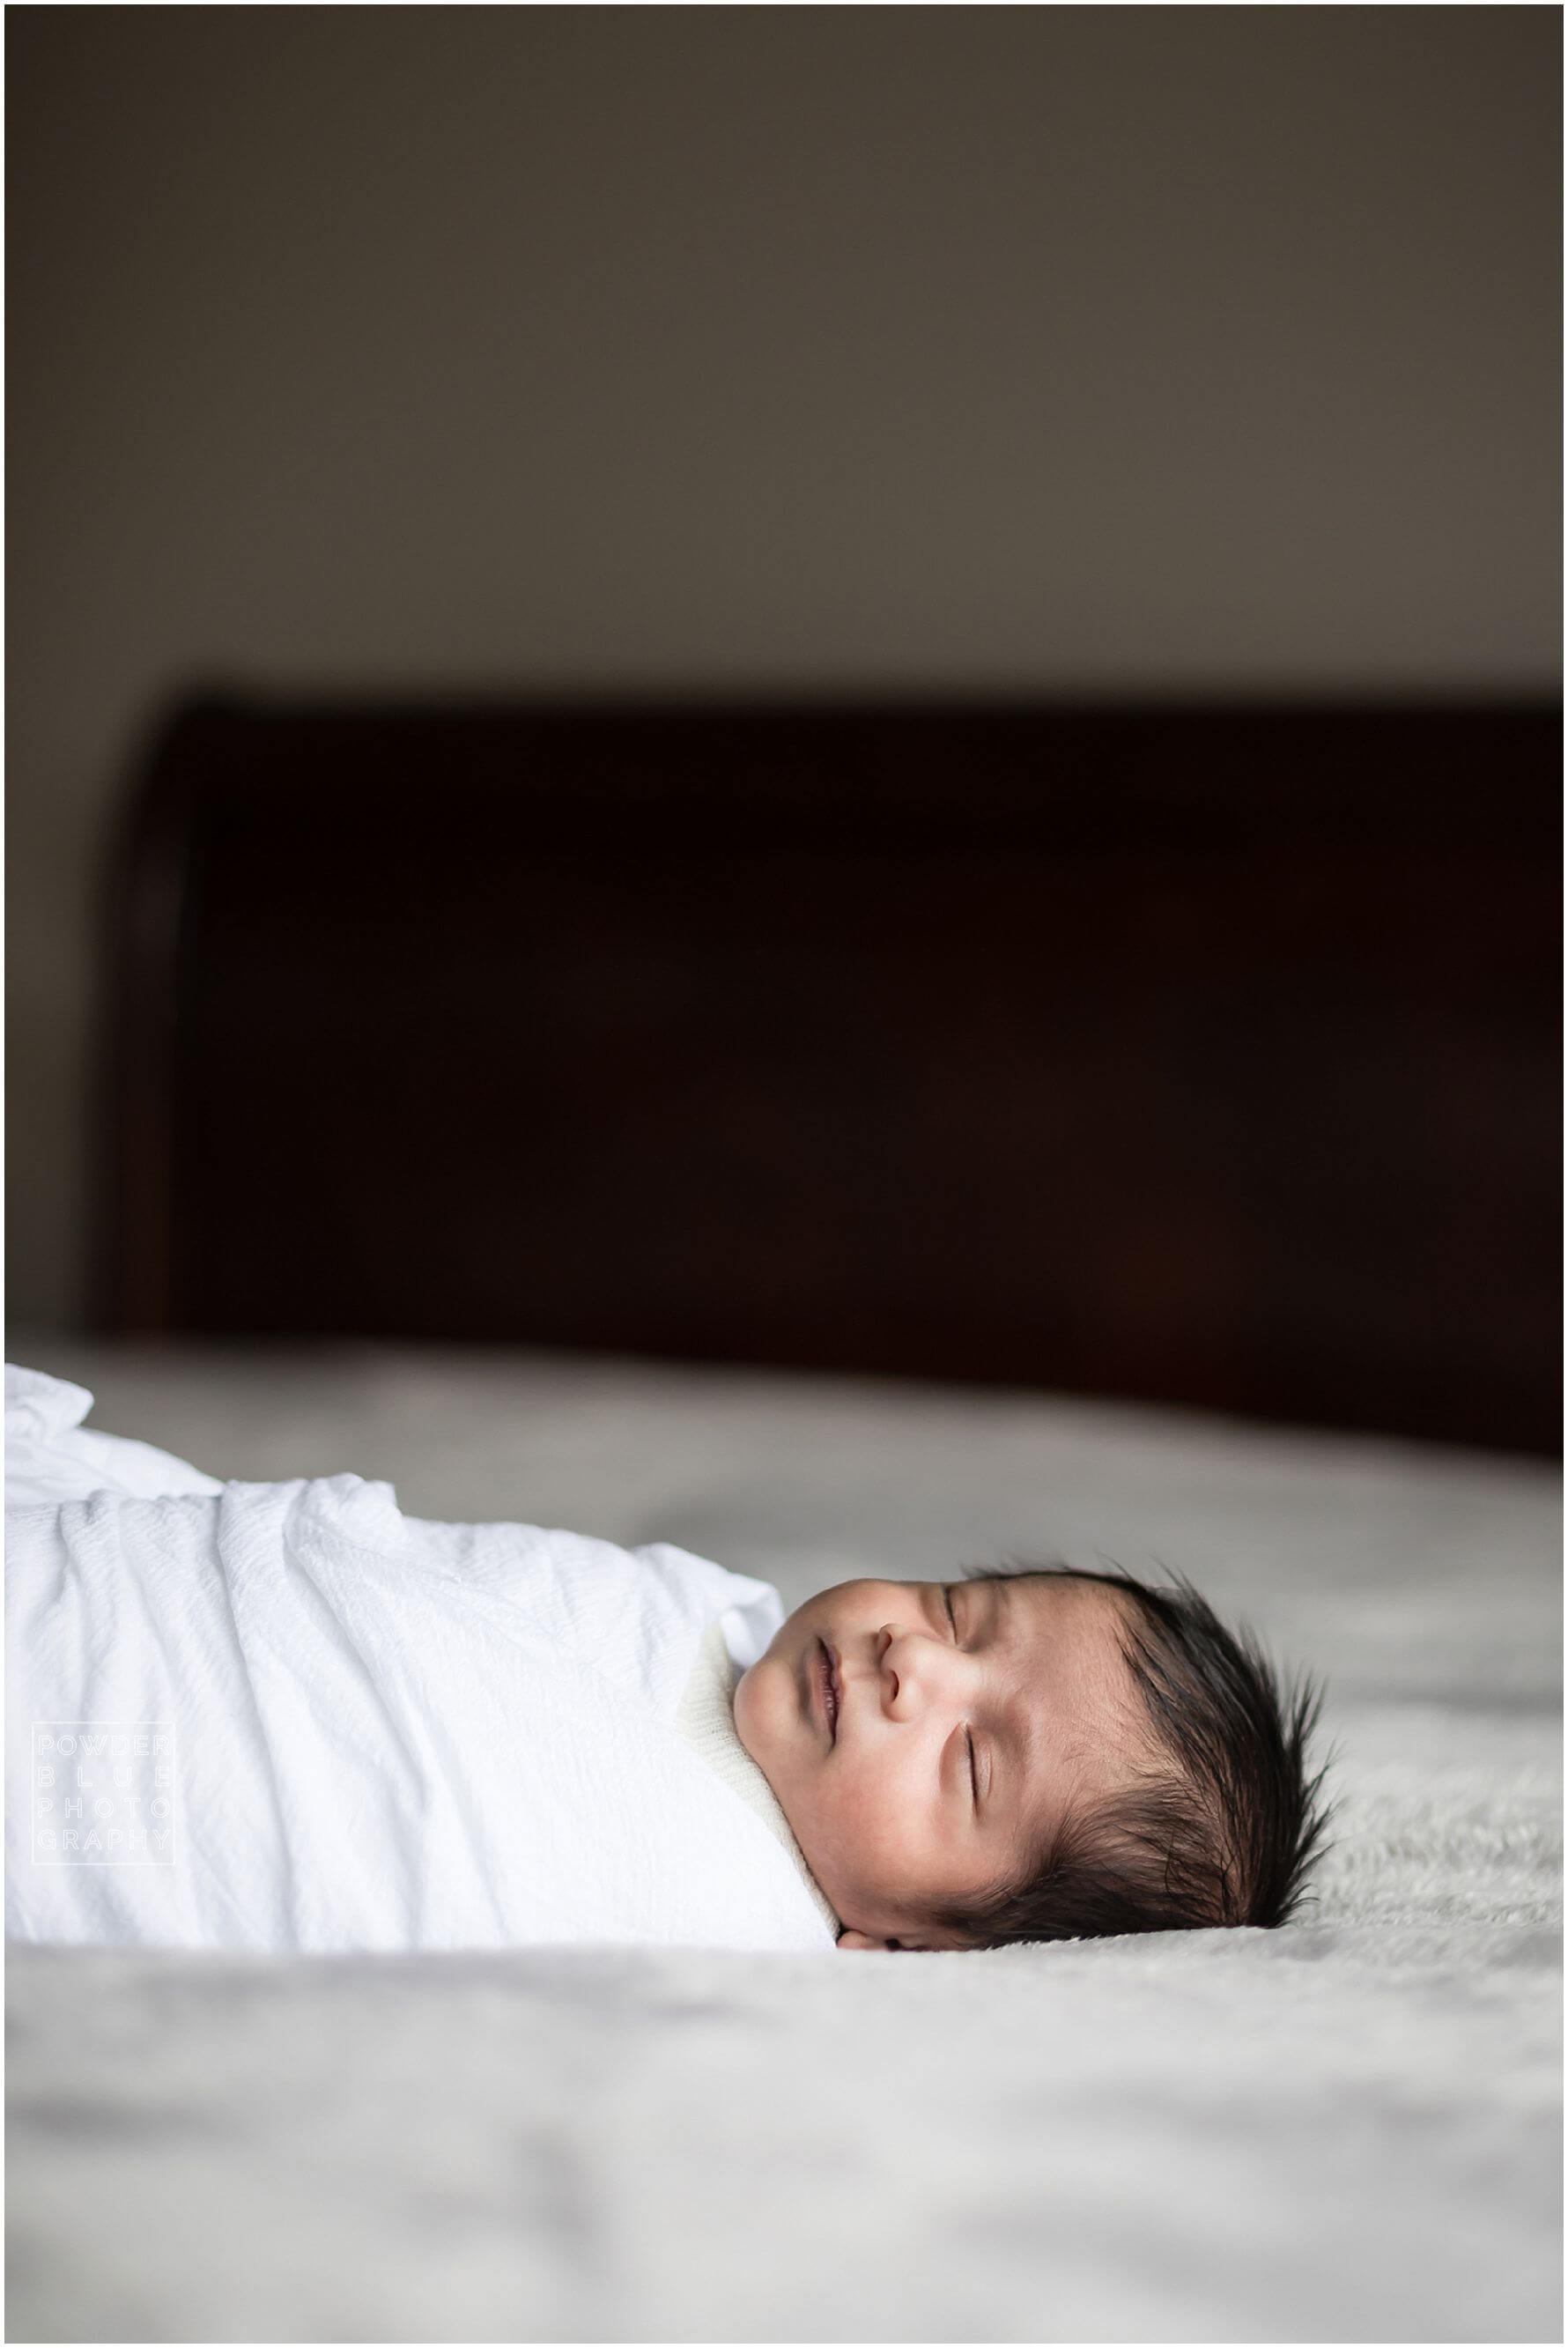 pittsburgh newborn photographer lifestyle photography session. newborn baby in black & white and color portraits on a bed in a home.